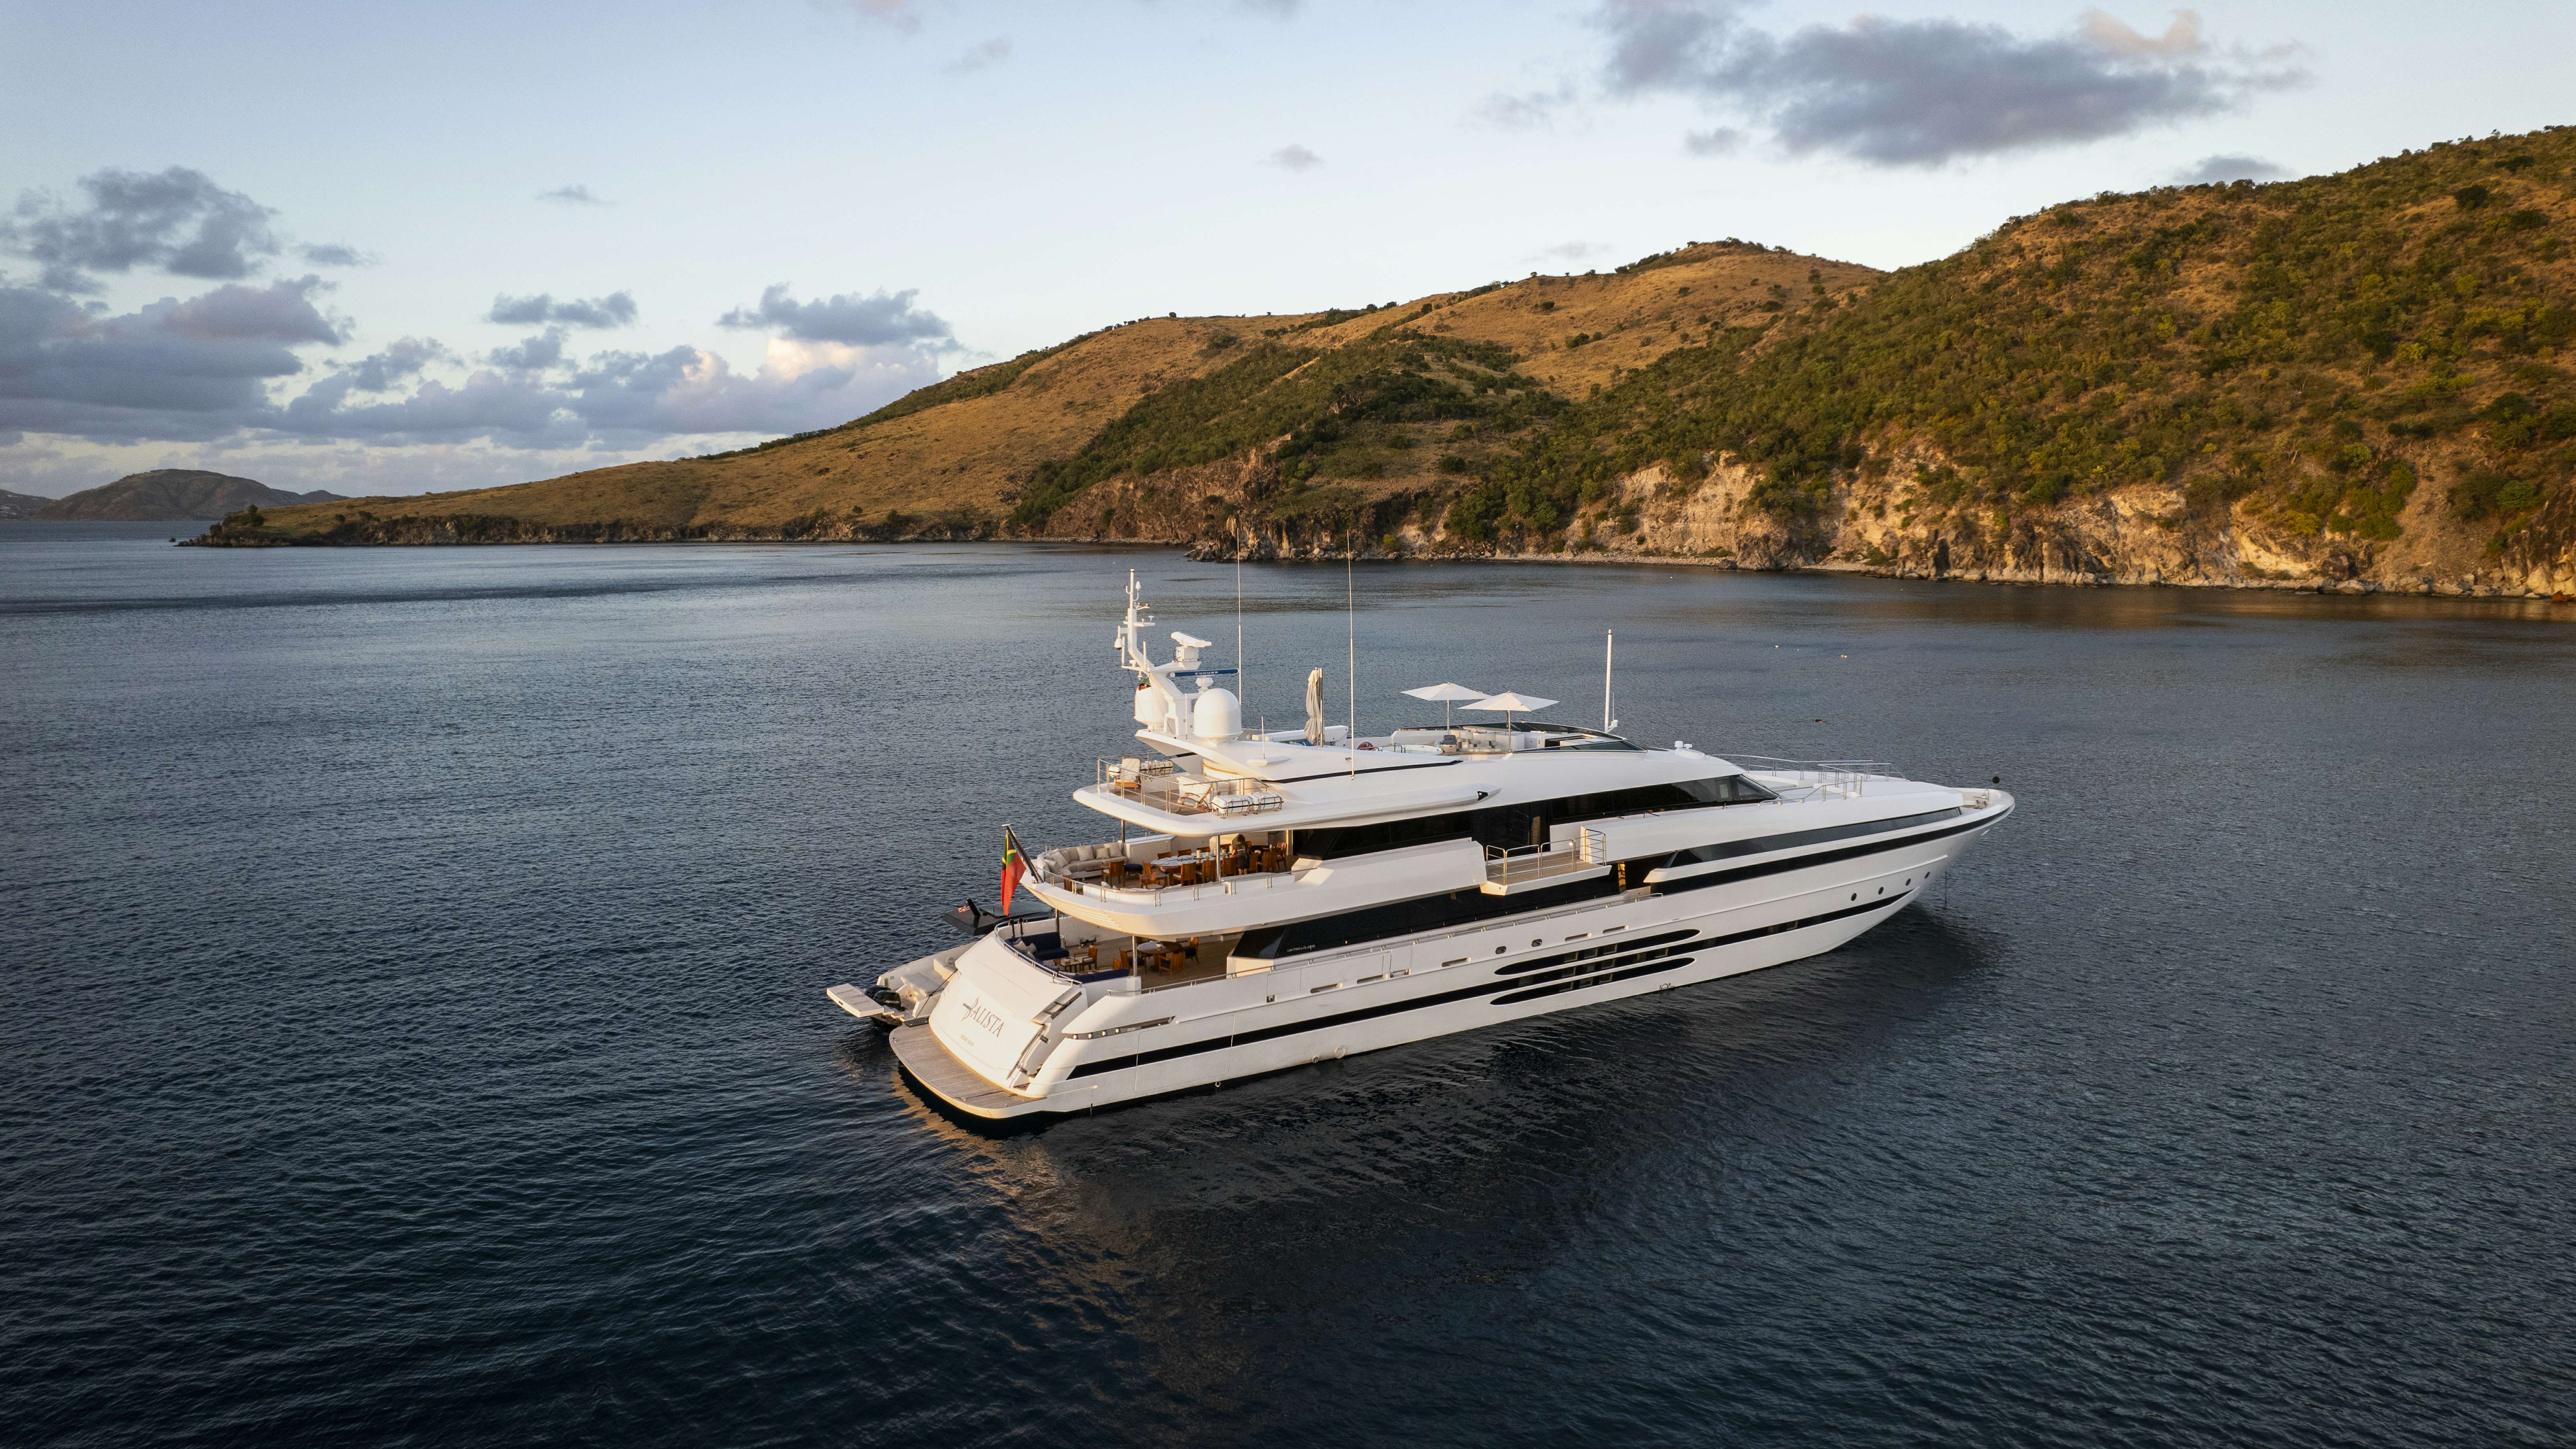 Watch Video for BALISTA Yacht for Sale